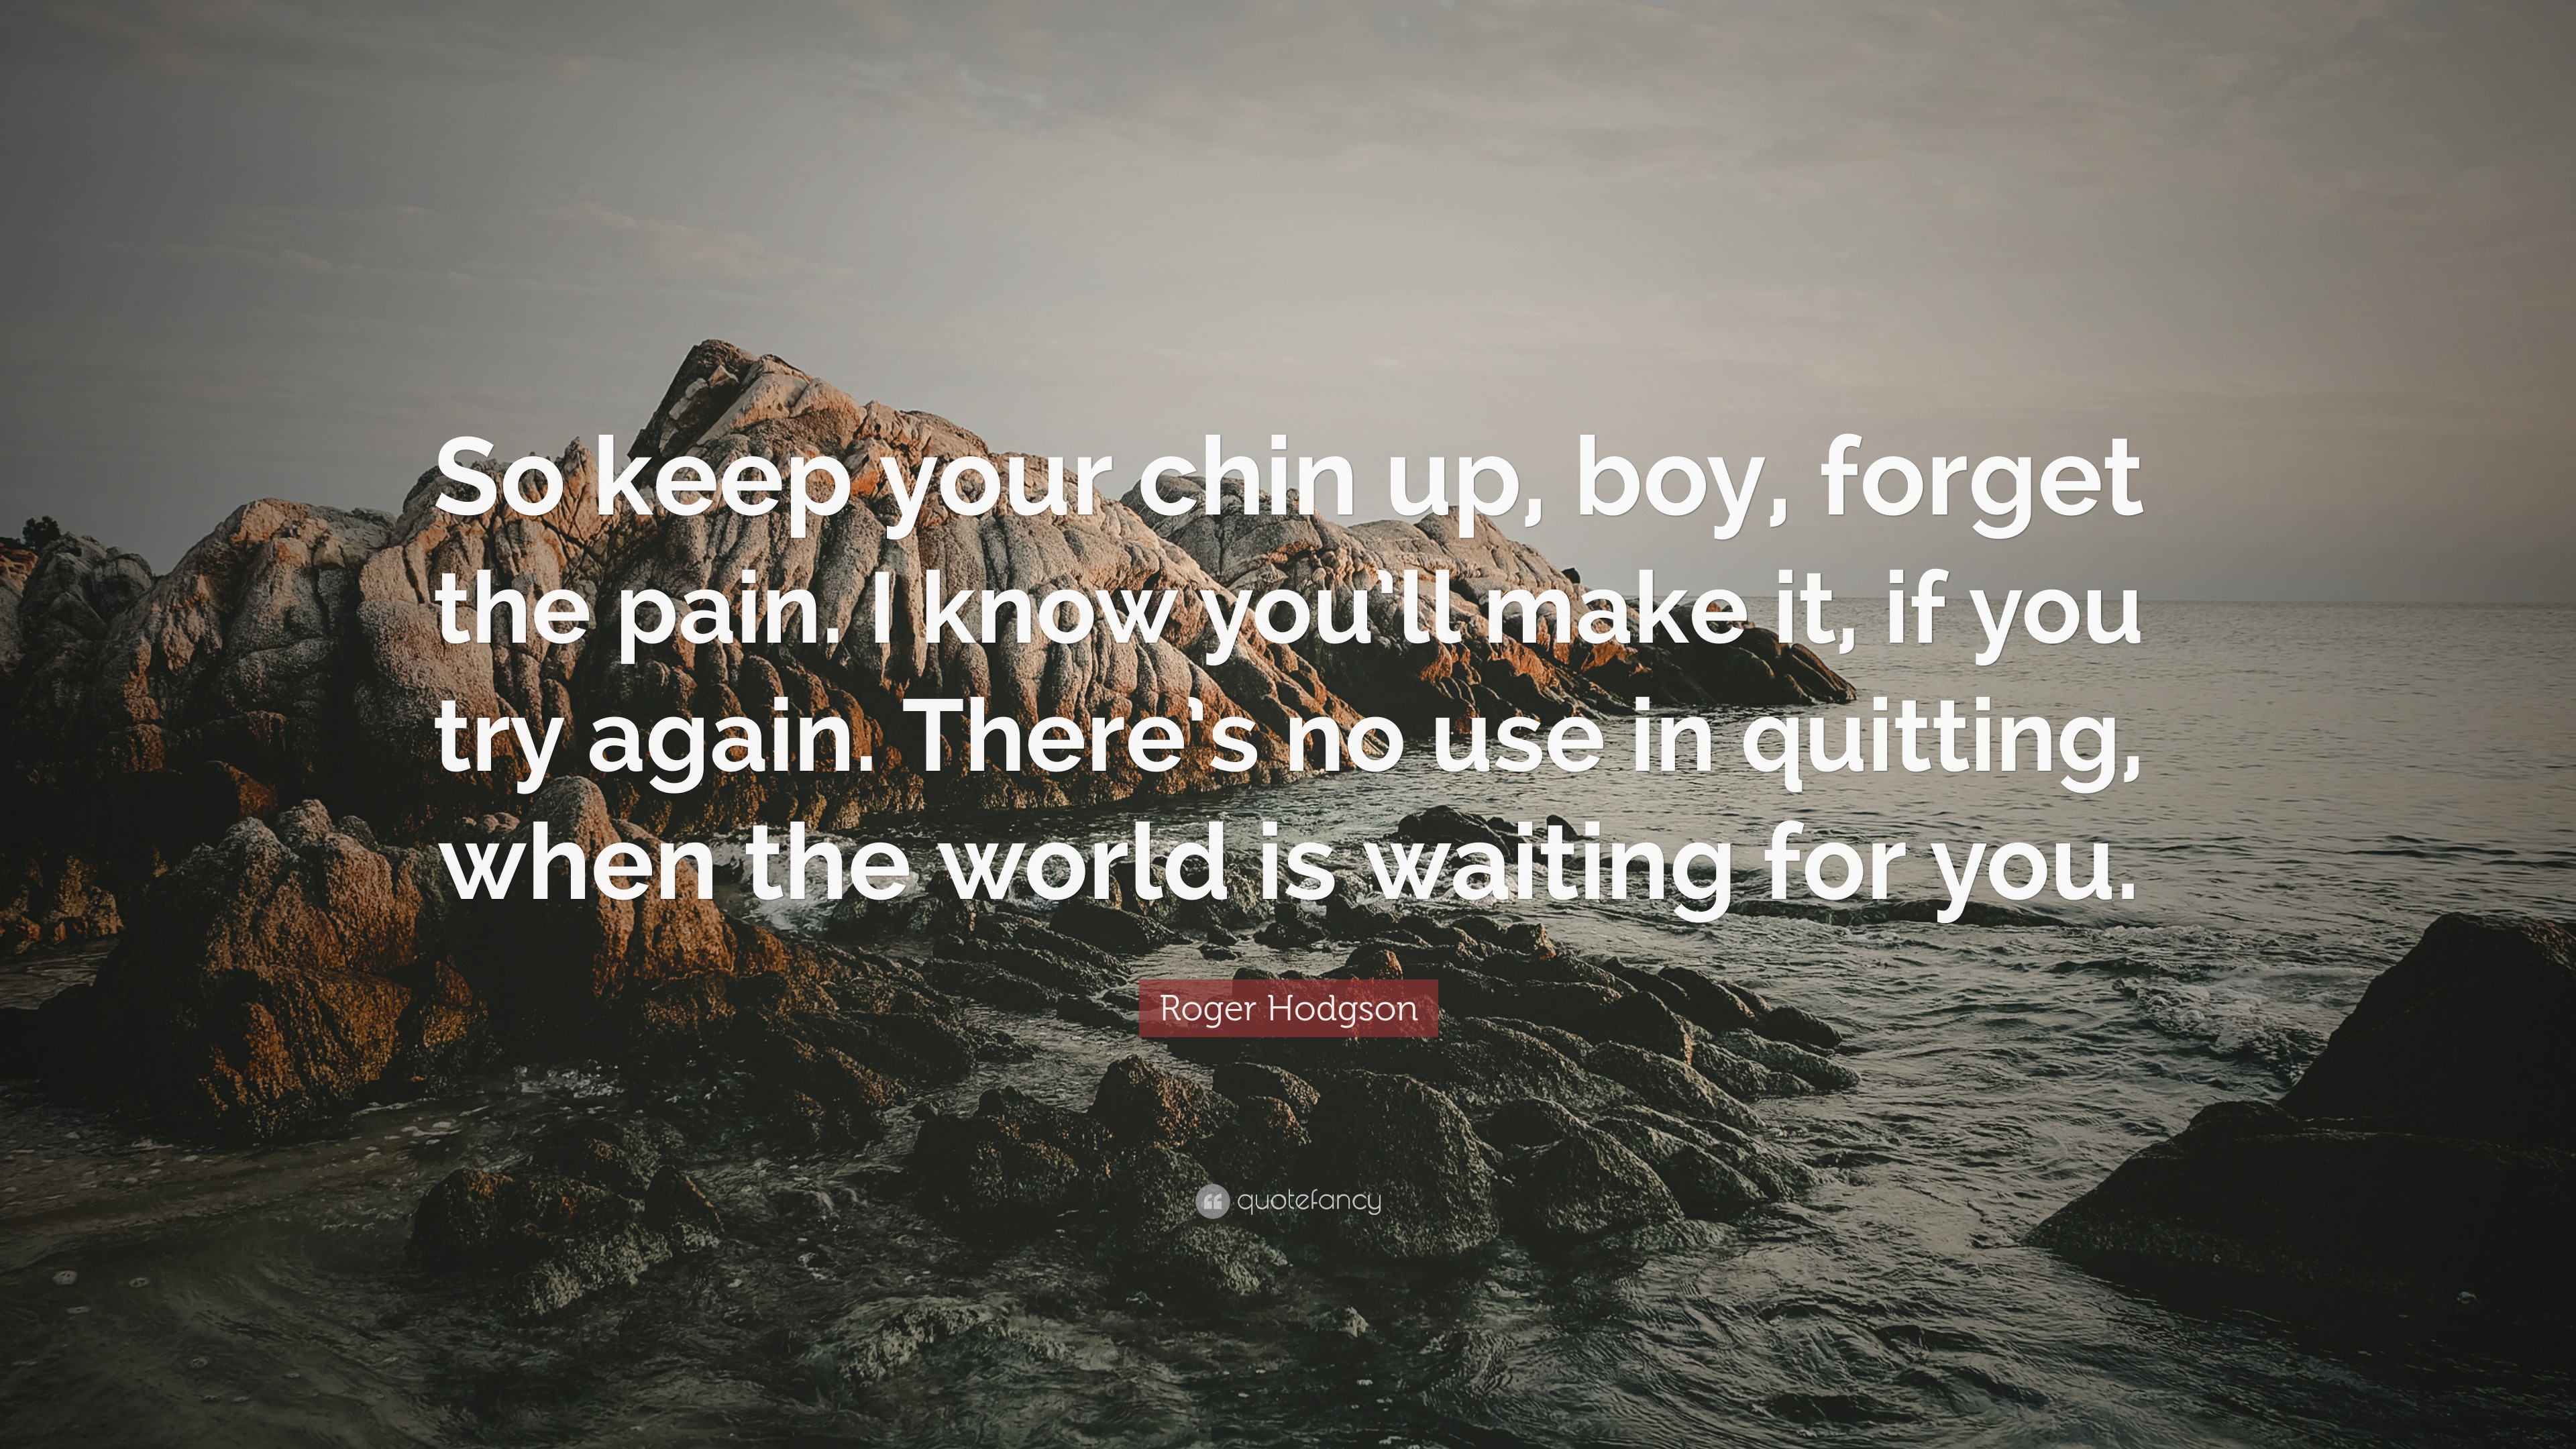 Roger Hodgson Quote: “So Keep Your Chin Up, Boy, Forget The Pain. I Know You'll Make It, If You Try Again. There's No Use In Quitting, When Th...”